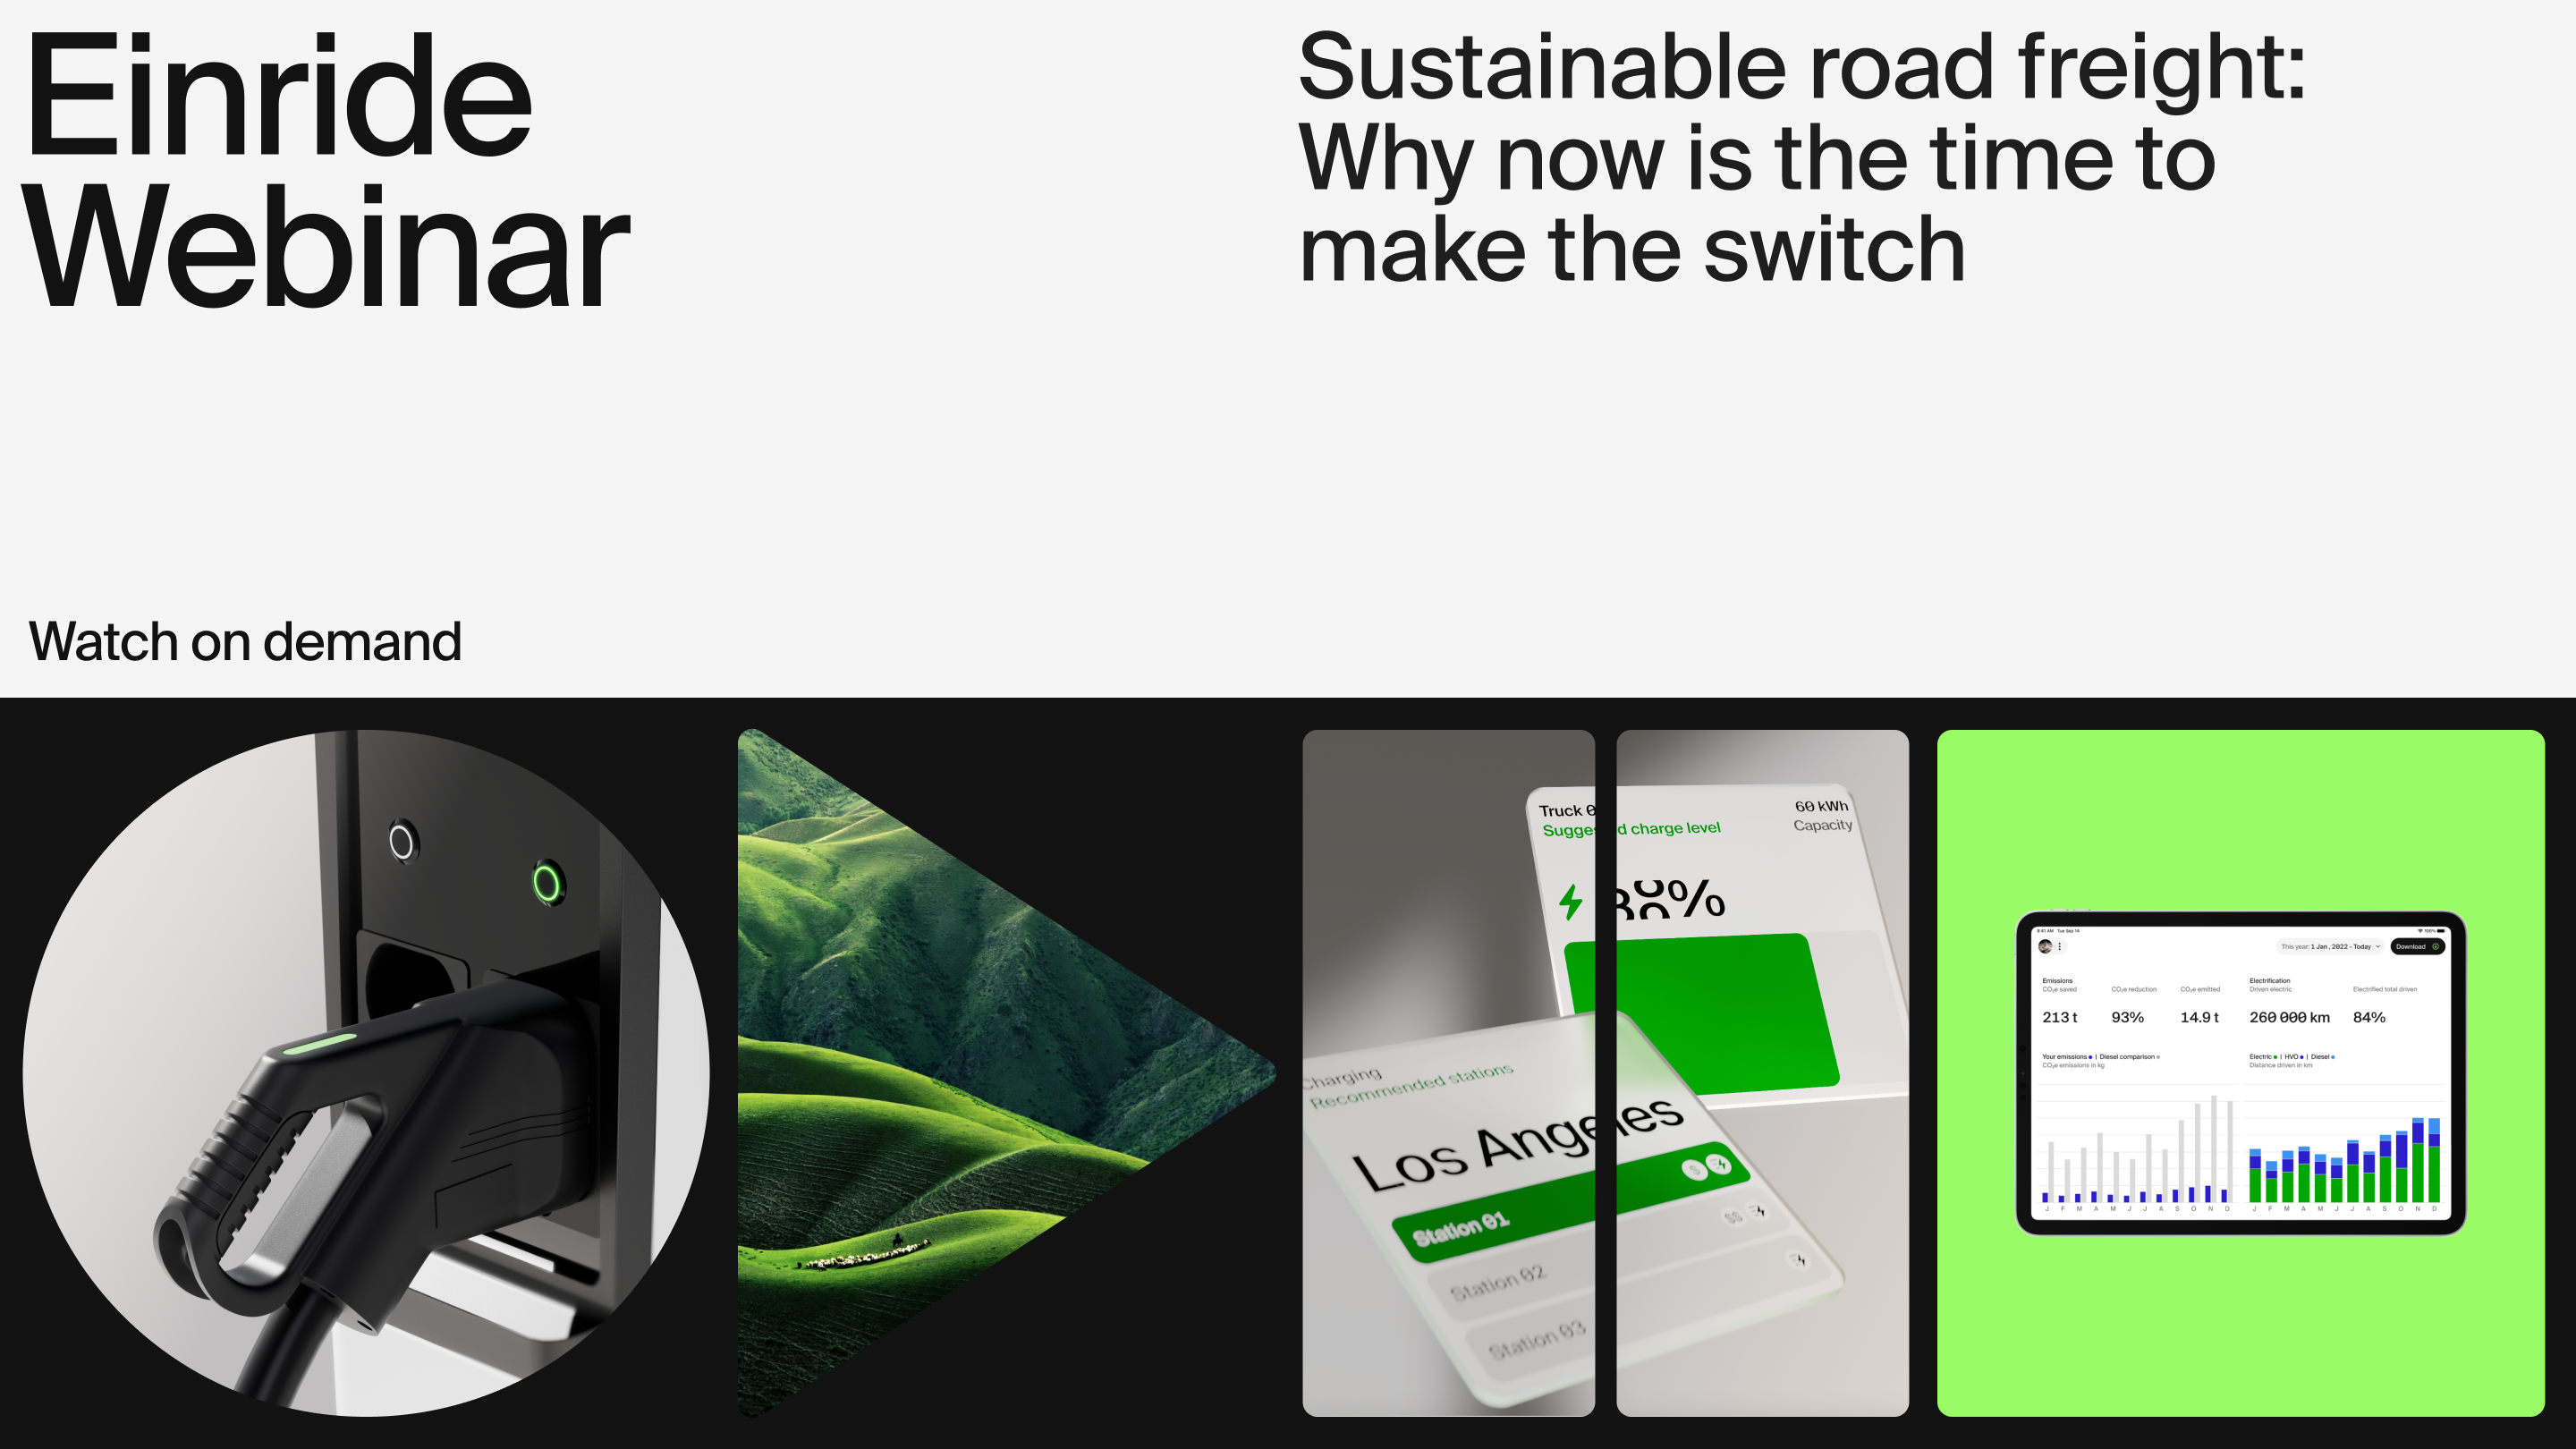 An image about our upcoming Einride Webinar: Sustainable road freight: Why now is the time to make the switch.